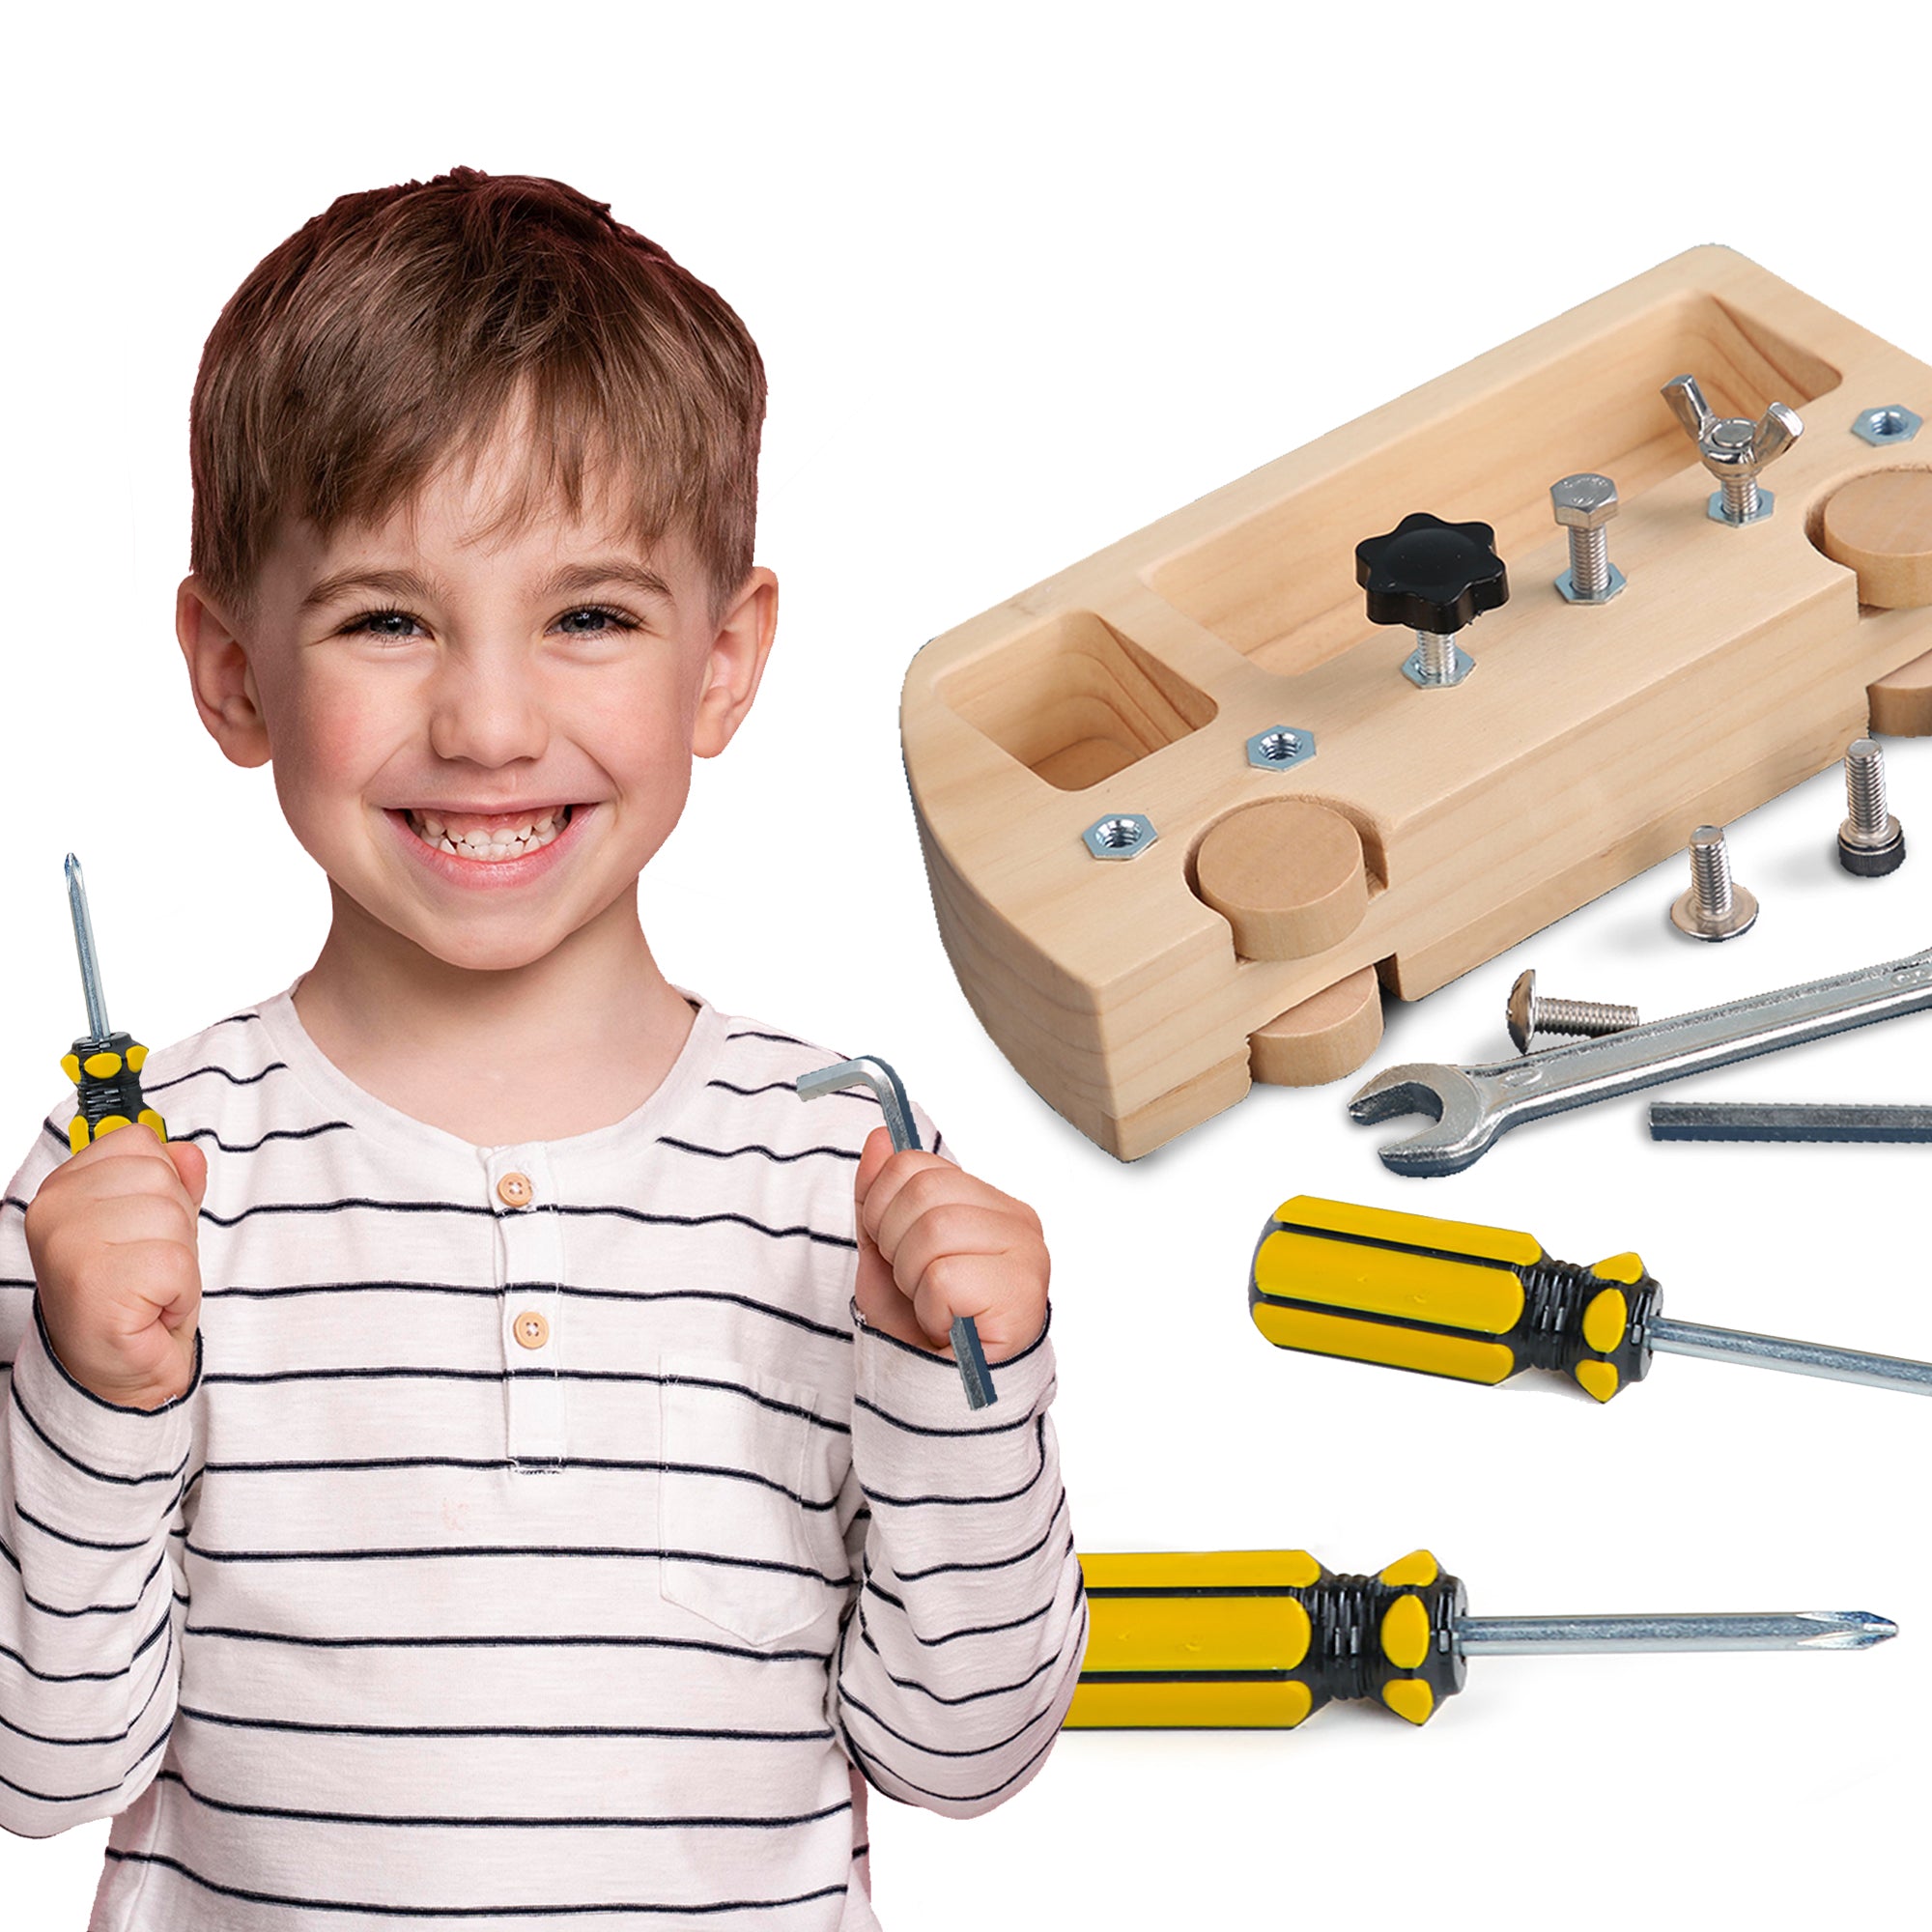 Wooden Tool Set, Wooden Toy Tool Kit, Repair Kit For Kids With Tool Box and  Bag, Birthday Gift For Boy, Montessori Toy For Child Development